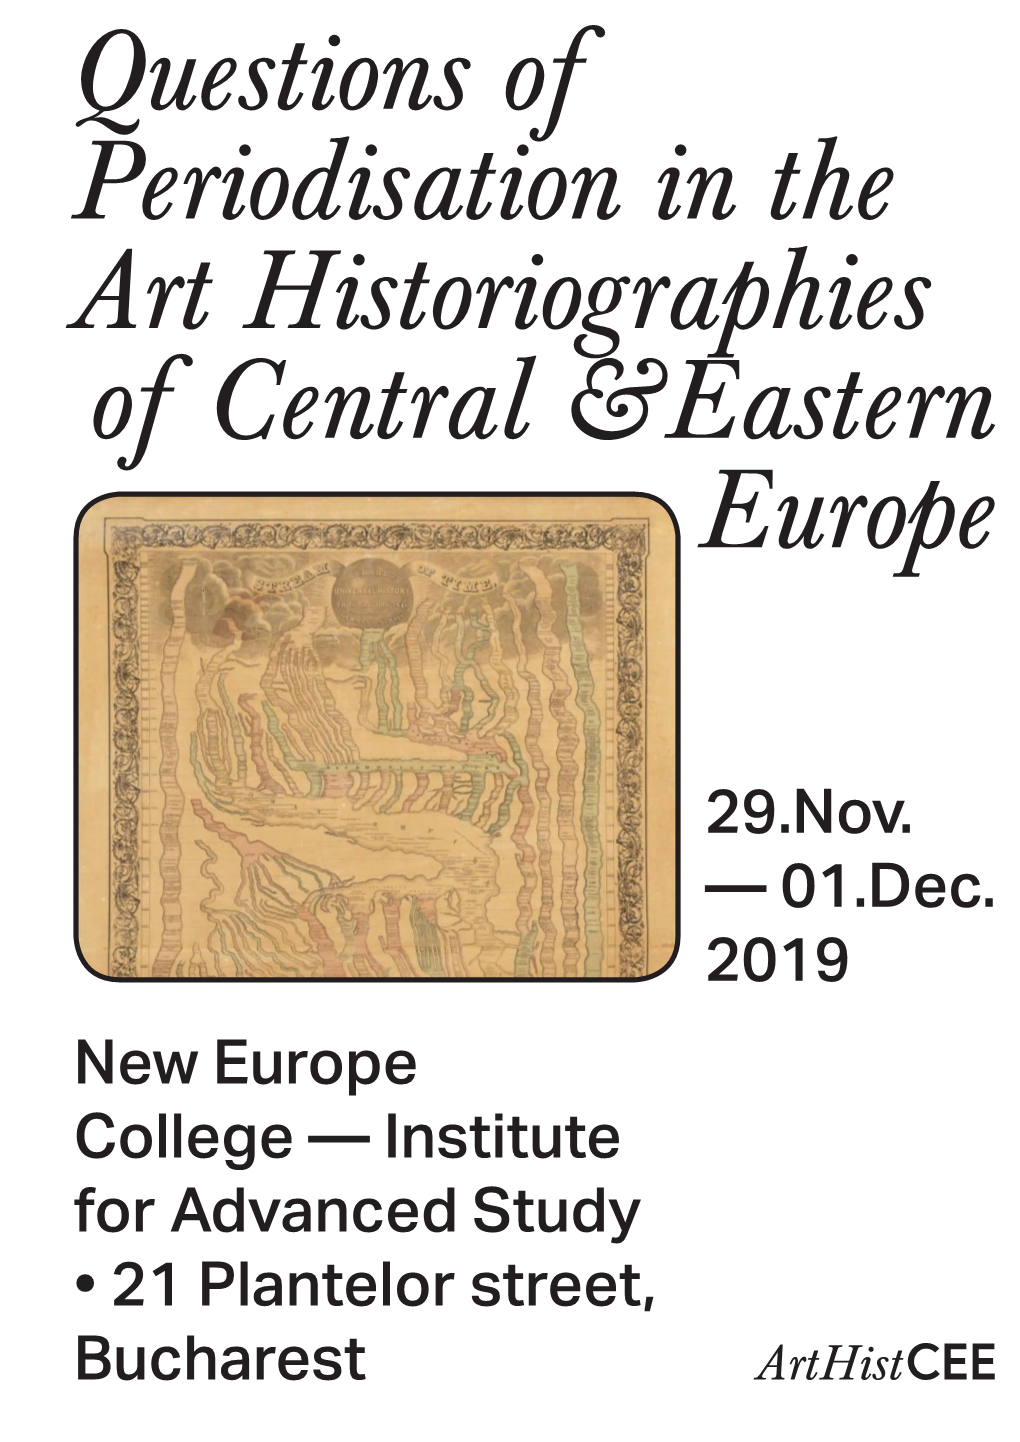 01.Dec. 2019 New Europe College — Institute for Advanced Study • 21 Plantelor Street, Bucharest Arthistcee Friday, 29.11